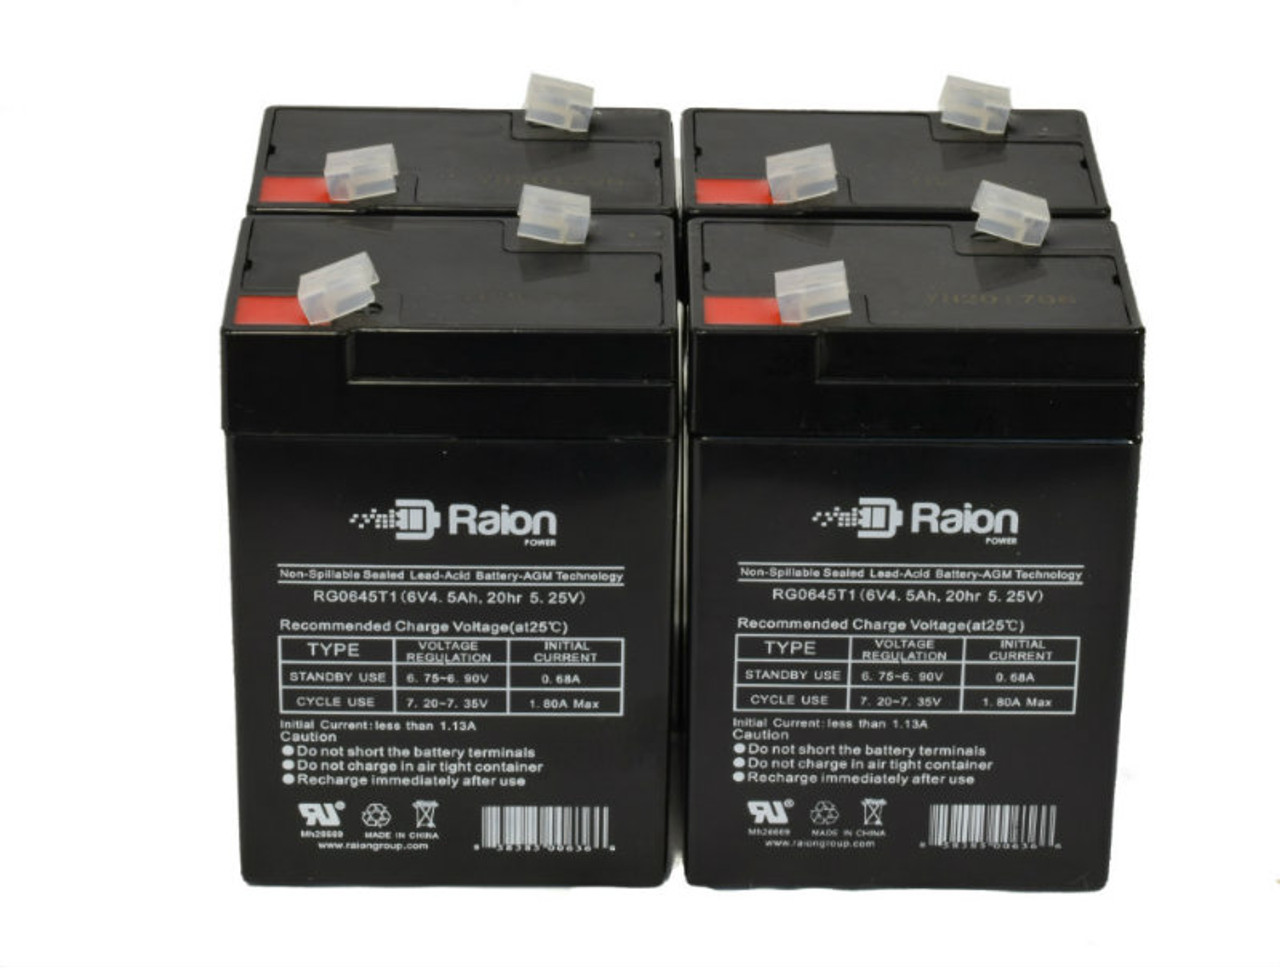 Raion Power 6V 4.5Ah Replacement Emergency Light Battery for Mule 6GC012E - 4 Pack